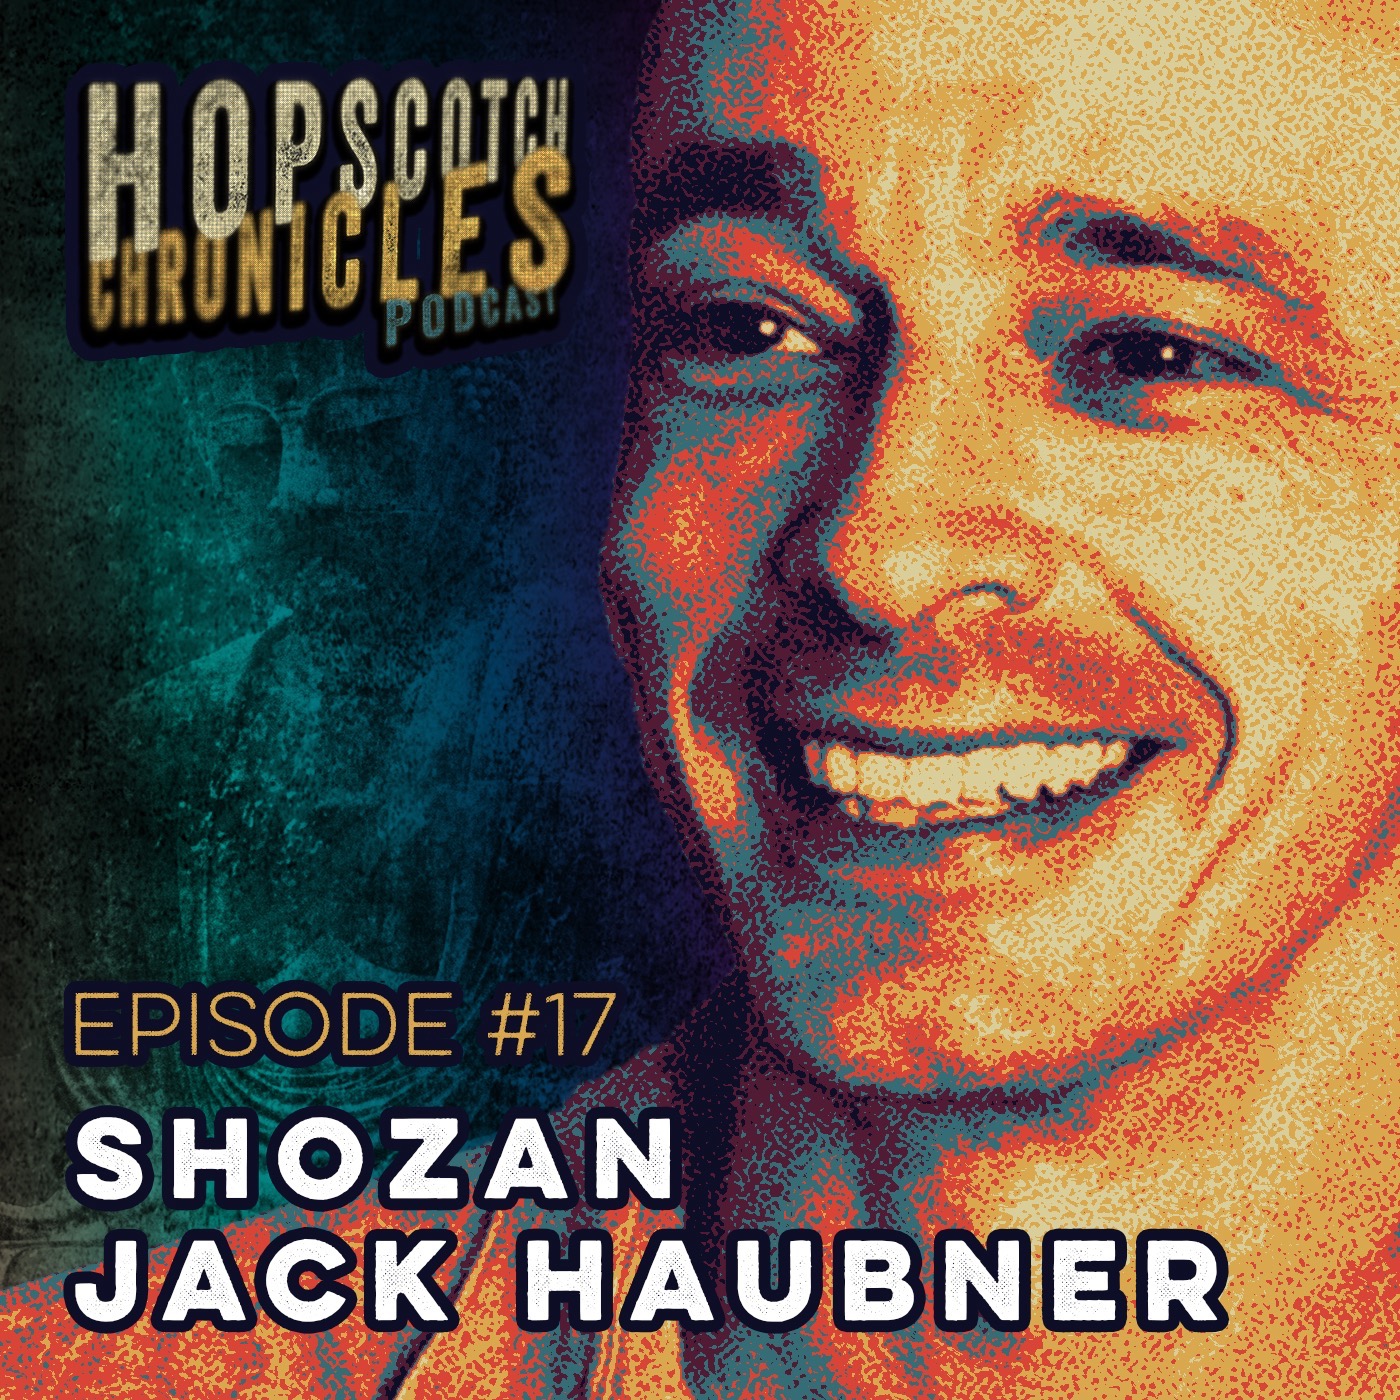 Shozan Jack Haubner: Zen and All the Gold in the World